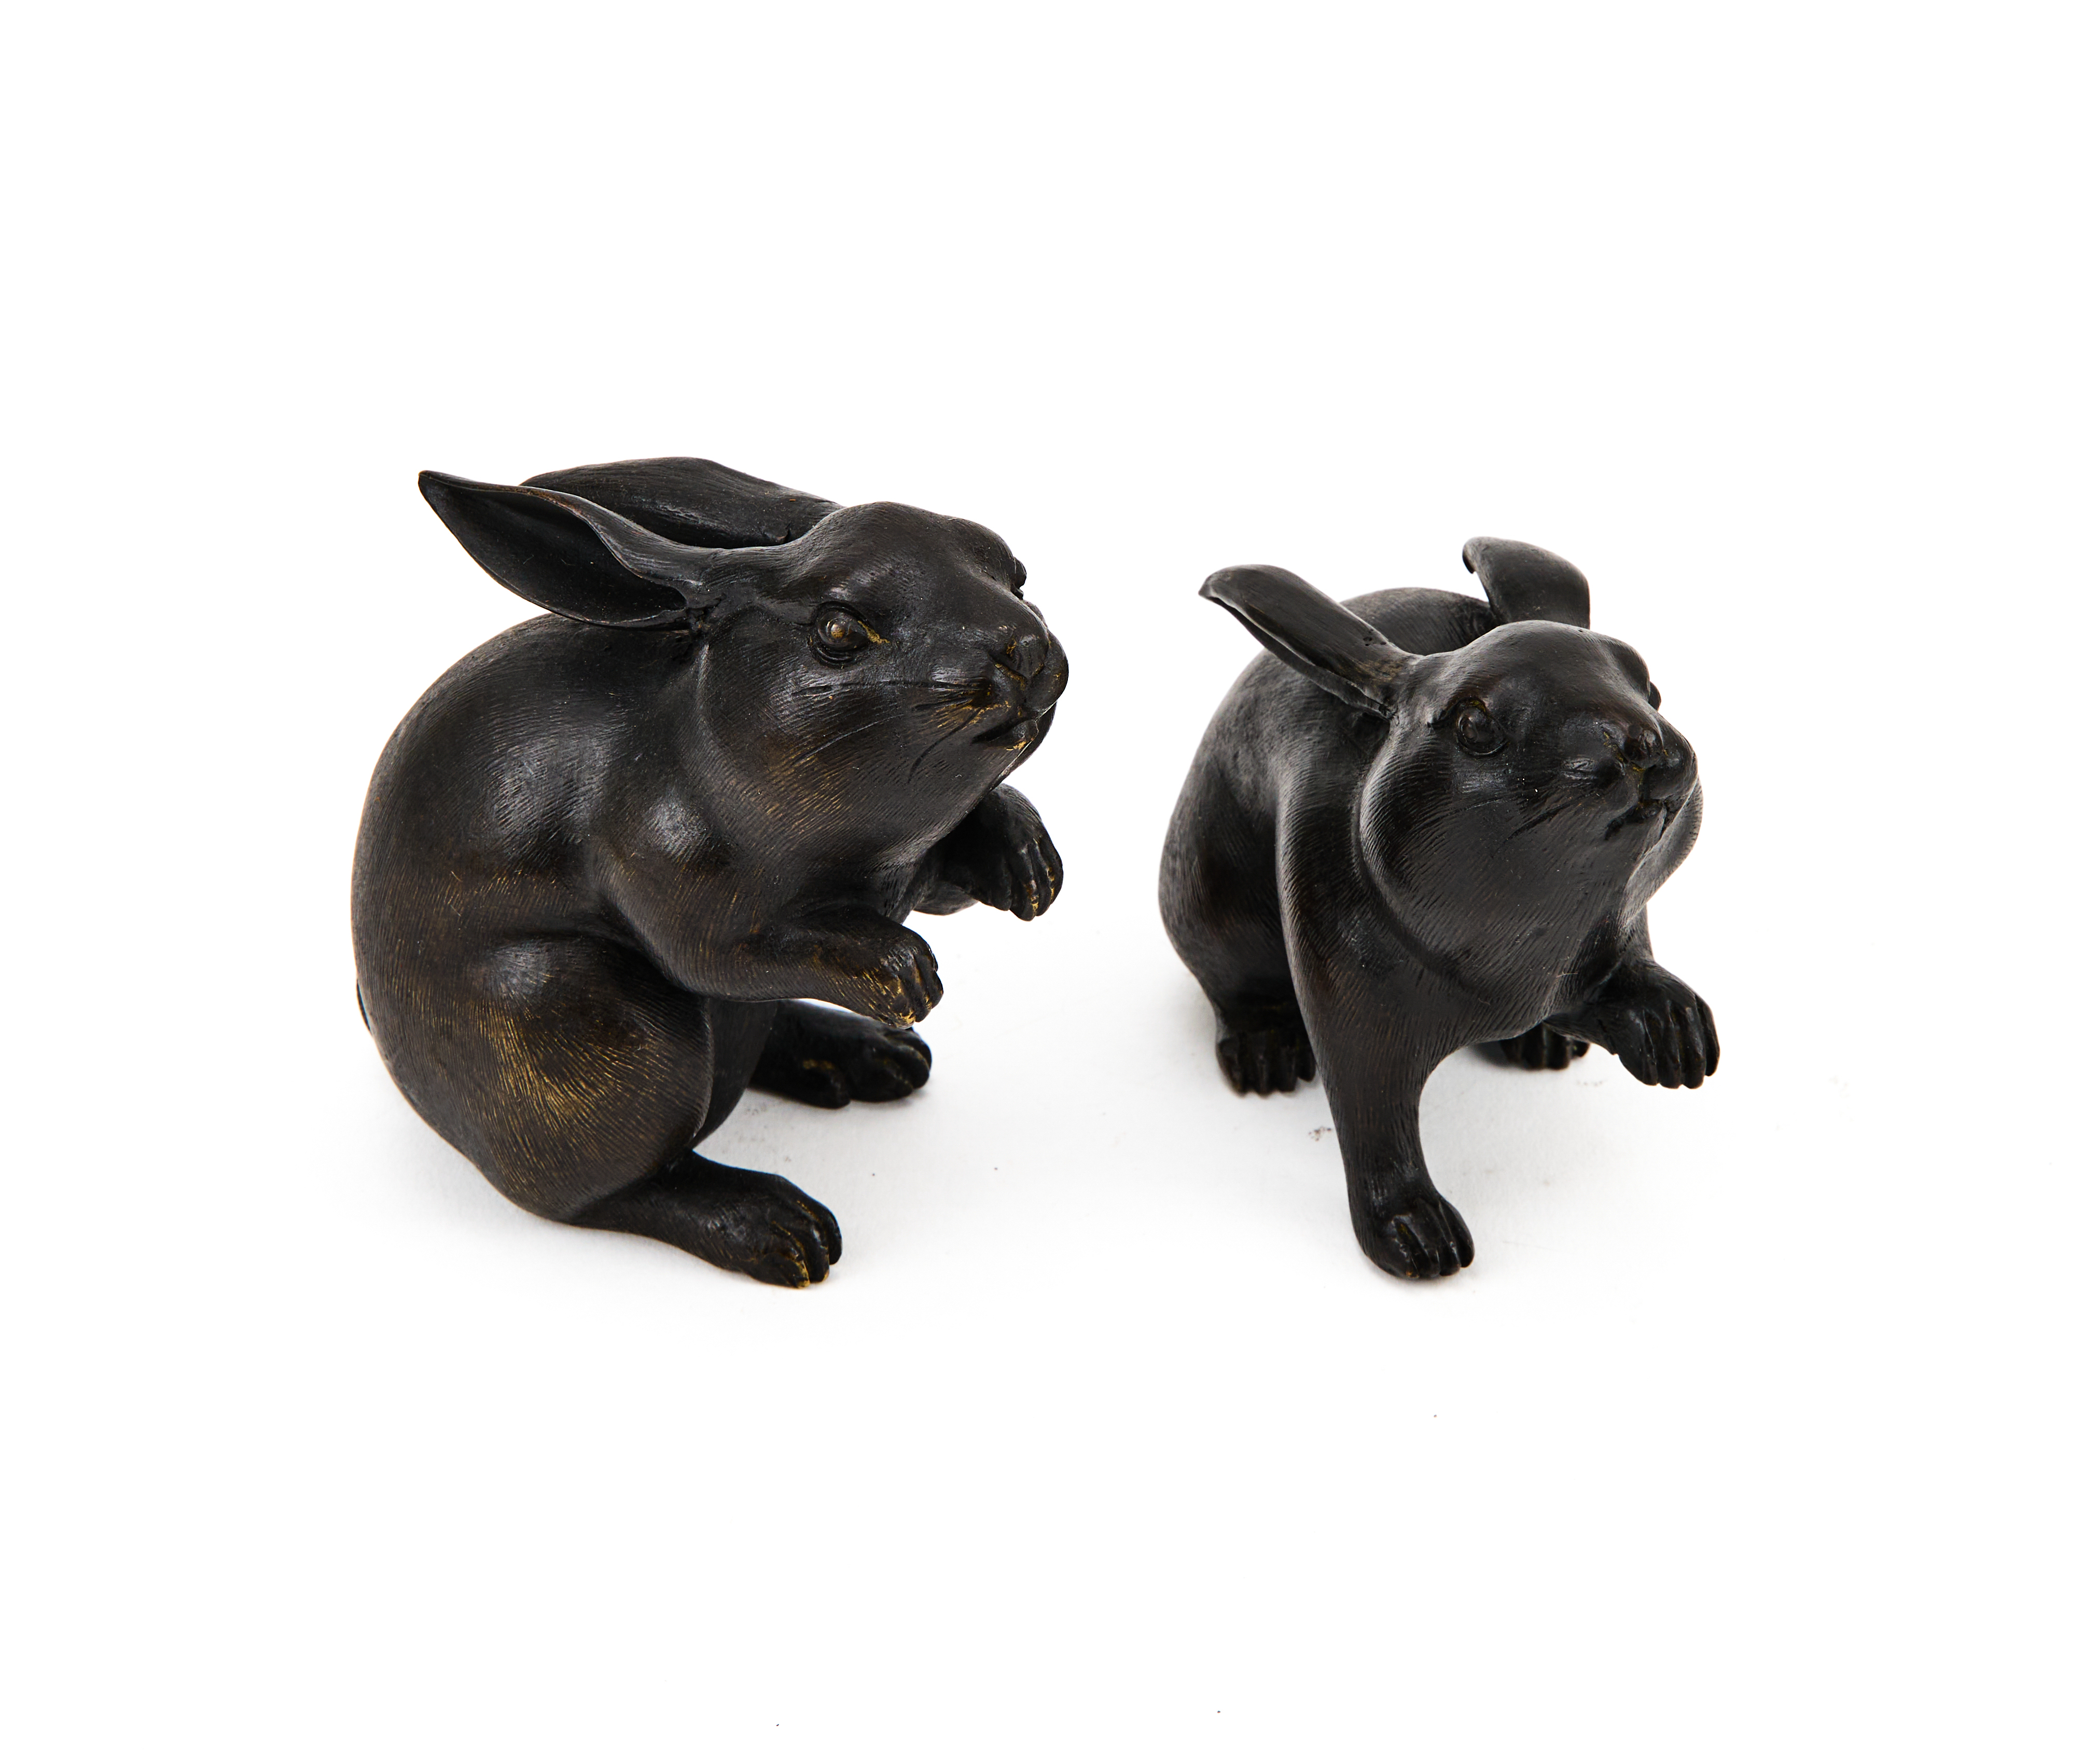 TWO JAPANESE BRONZE HARES, MEIJI PERIOD (1868-1912) - Image 5 of 5